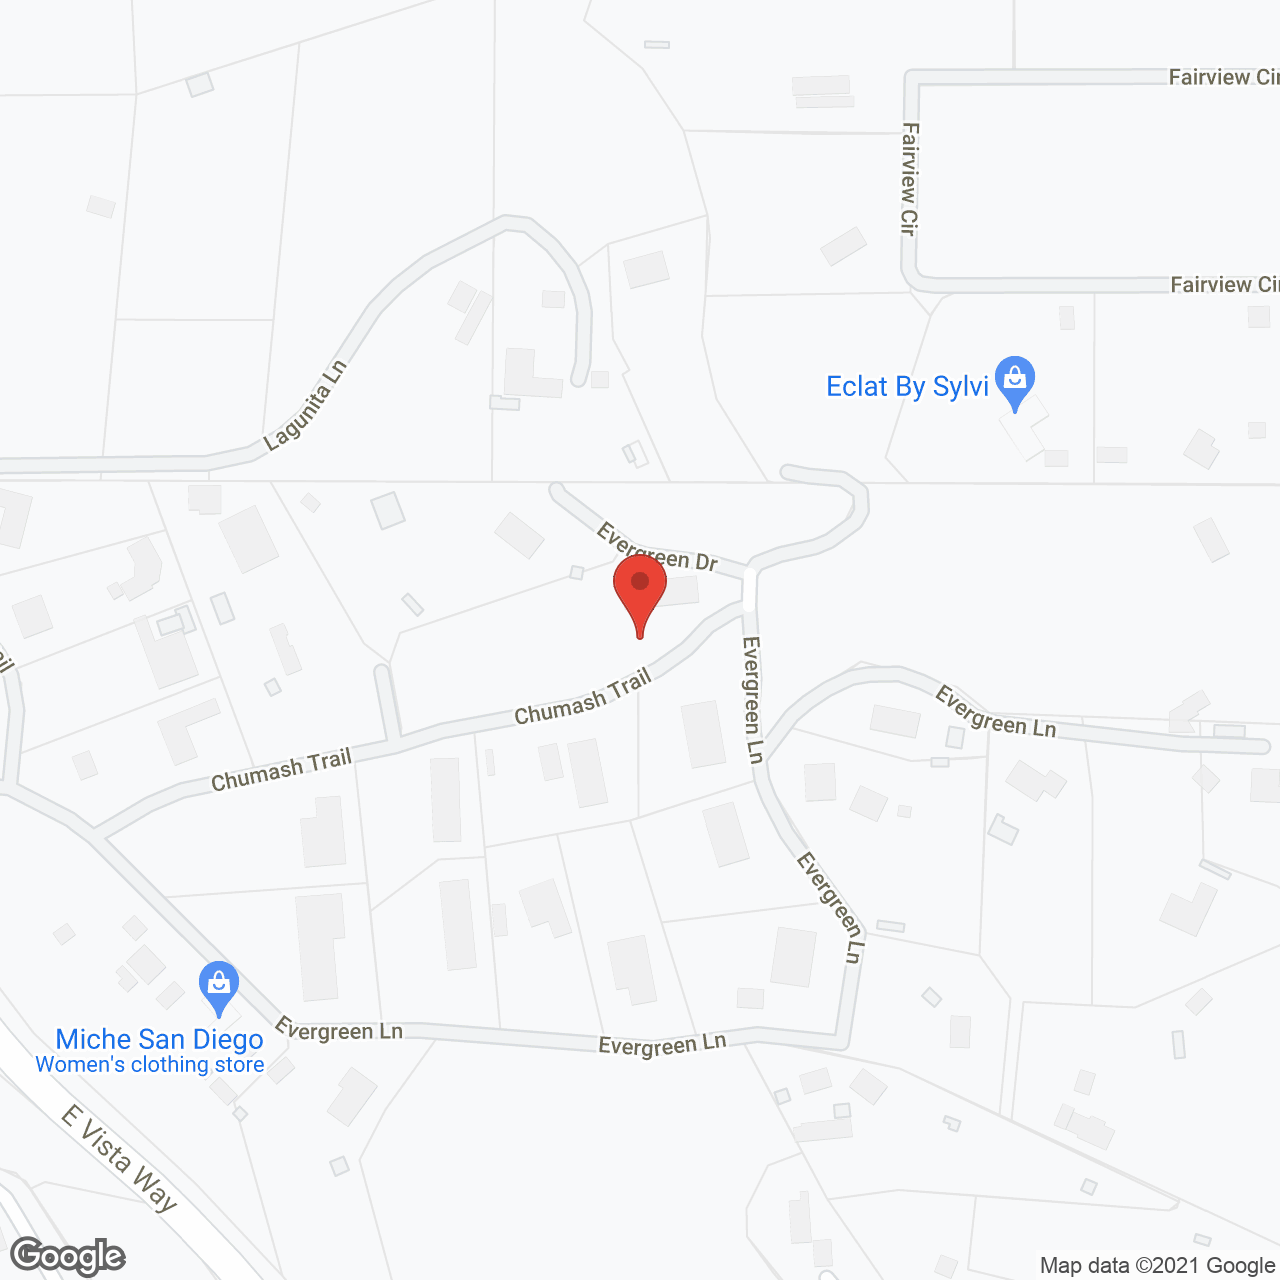 Mountain View Manor in google map